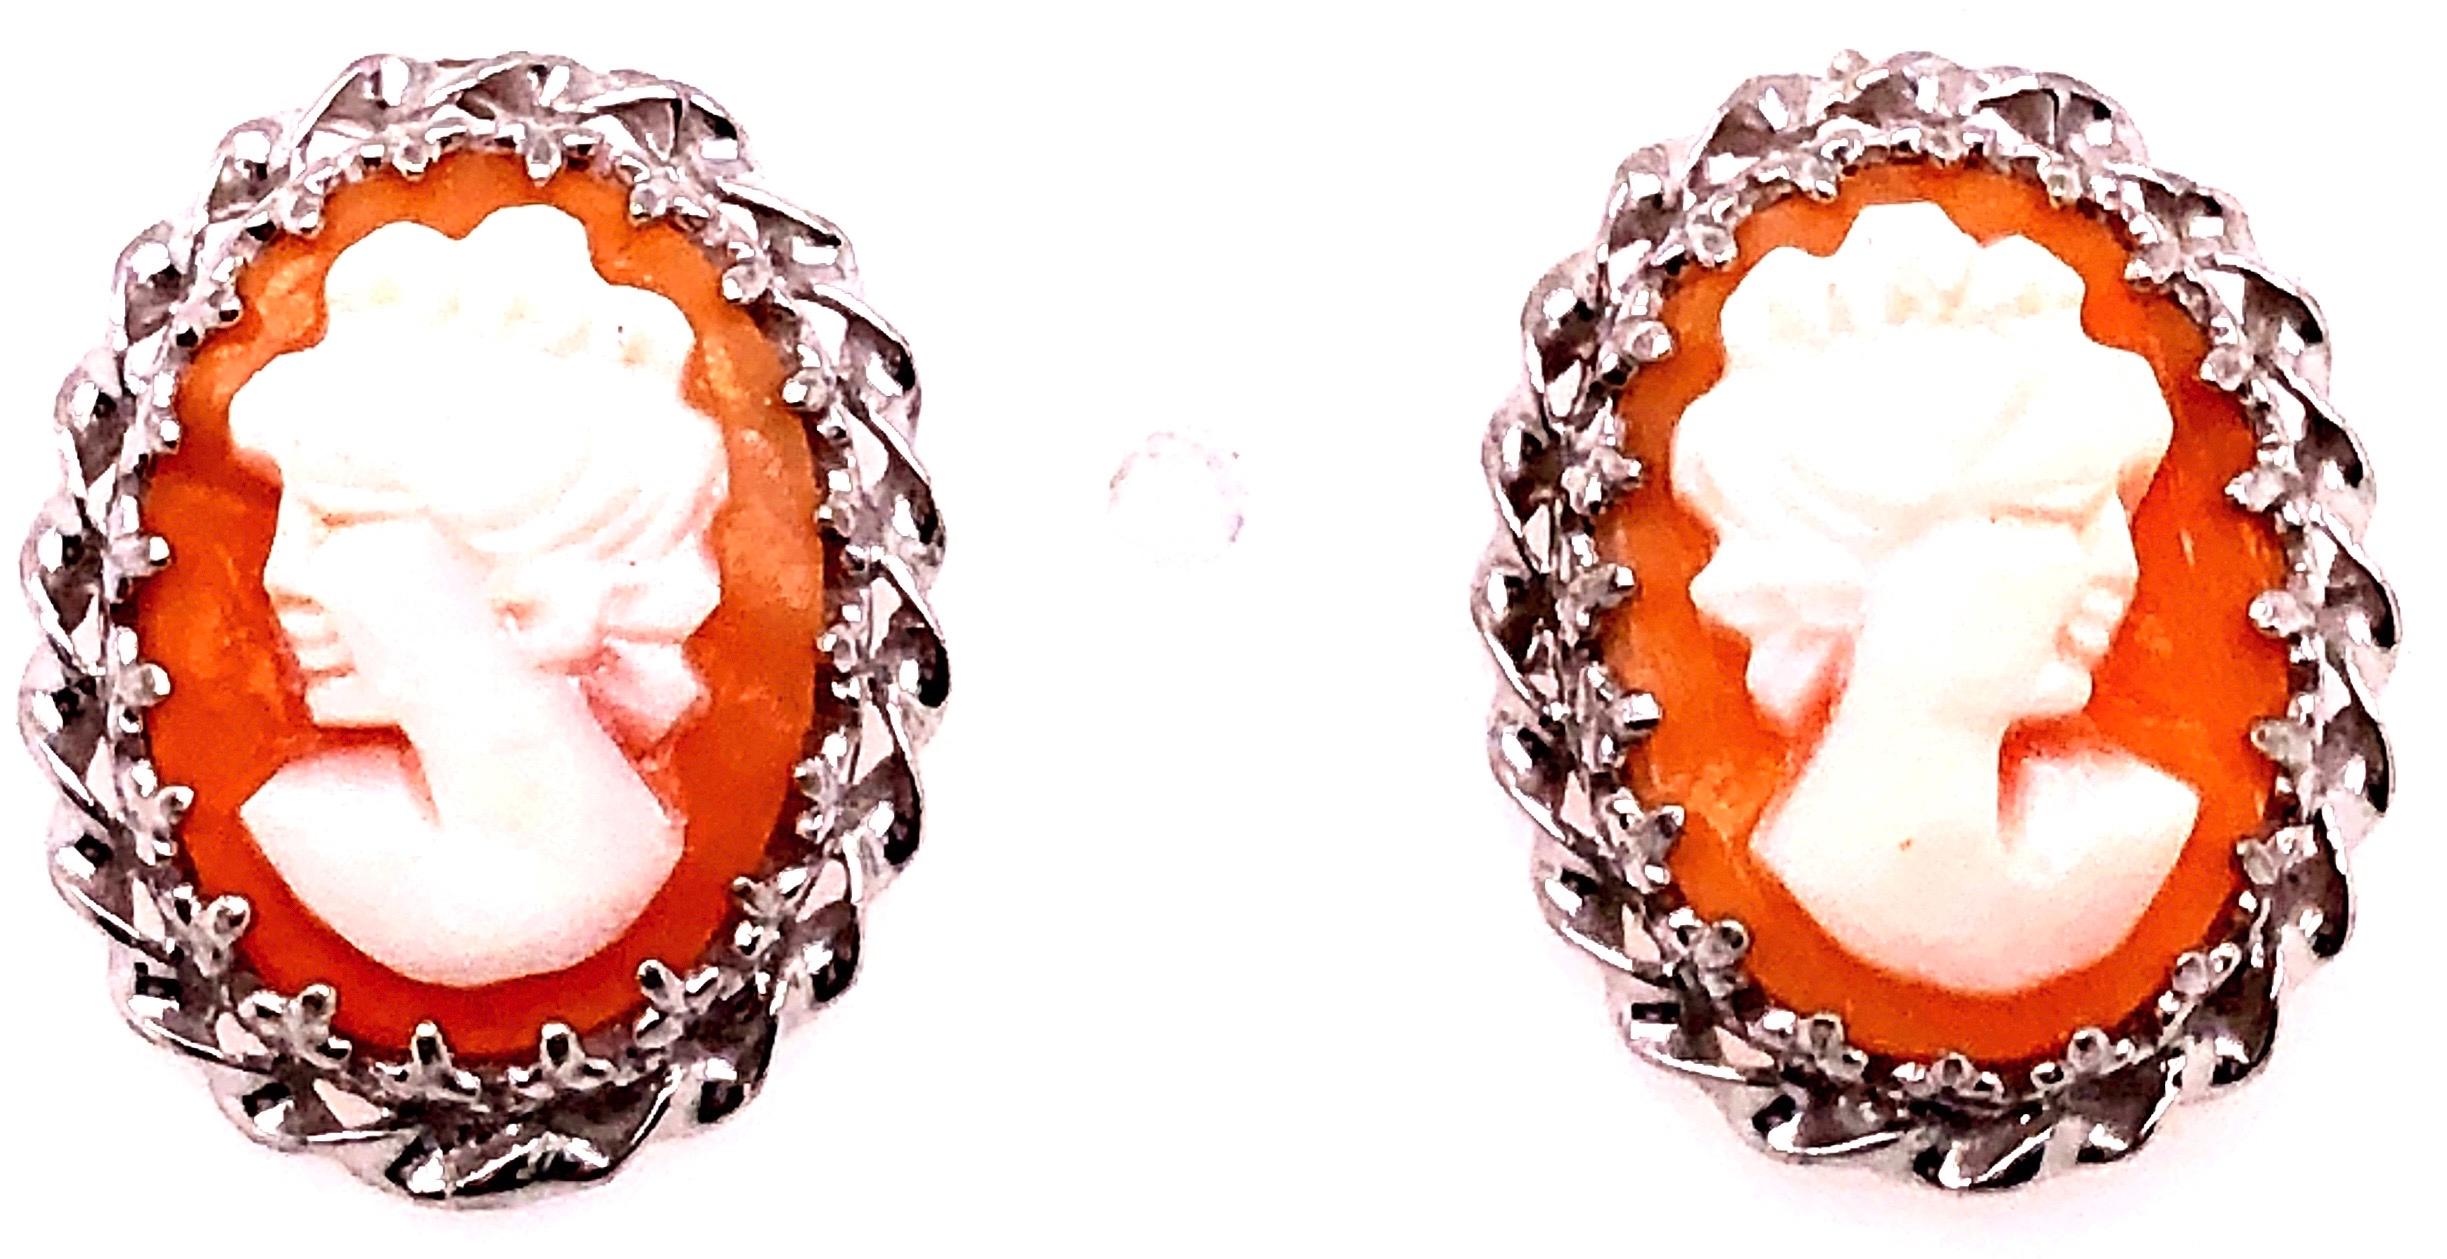 Cameo Earrings With Braided 14 Karat White Gold Border Post Back
5.61 total weight.